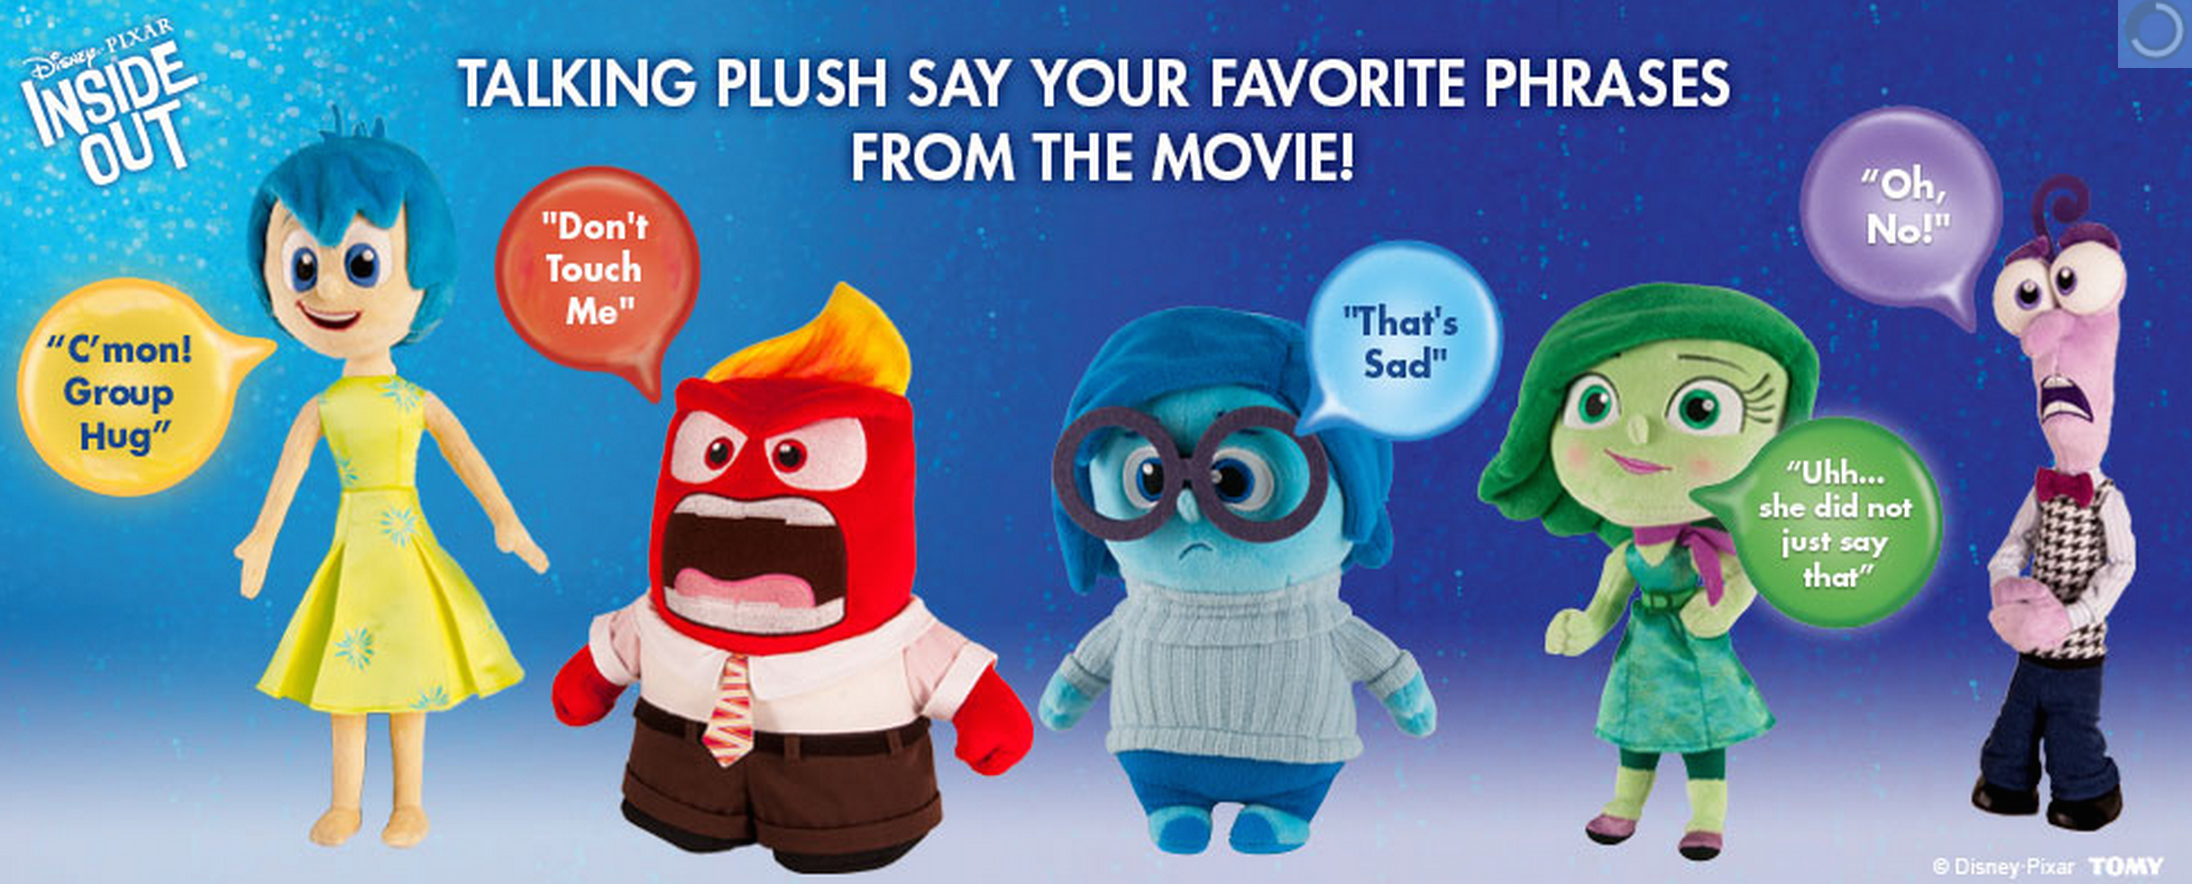 inside out plush characters